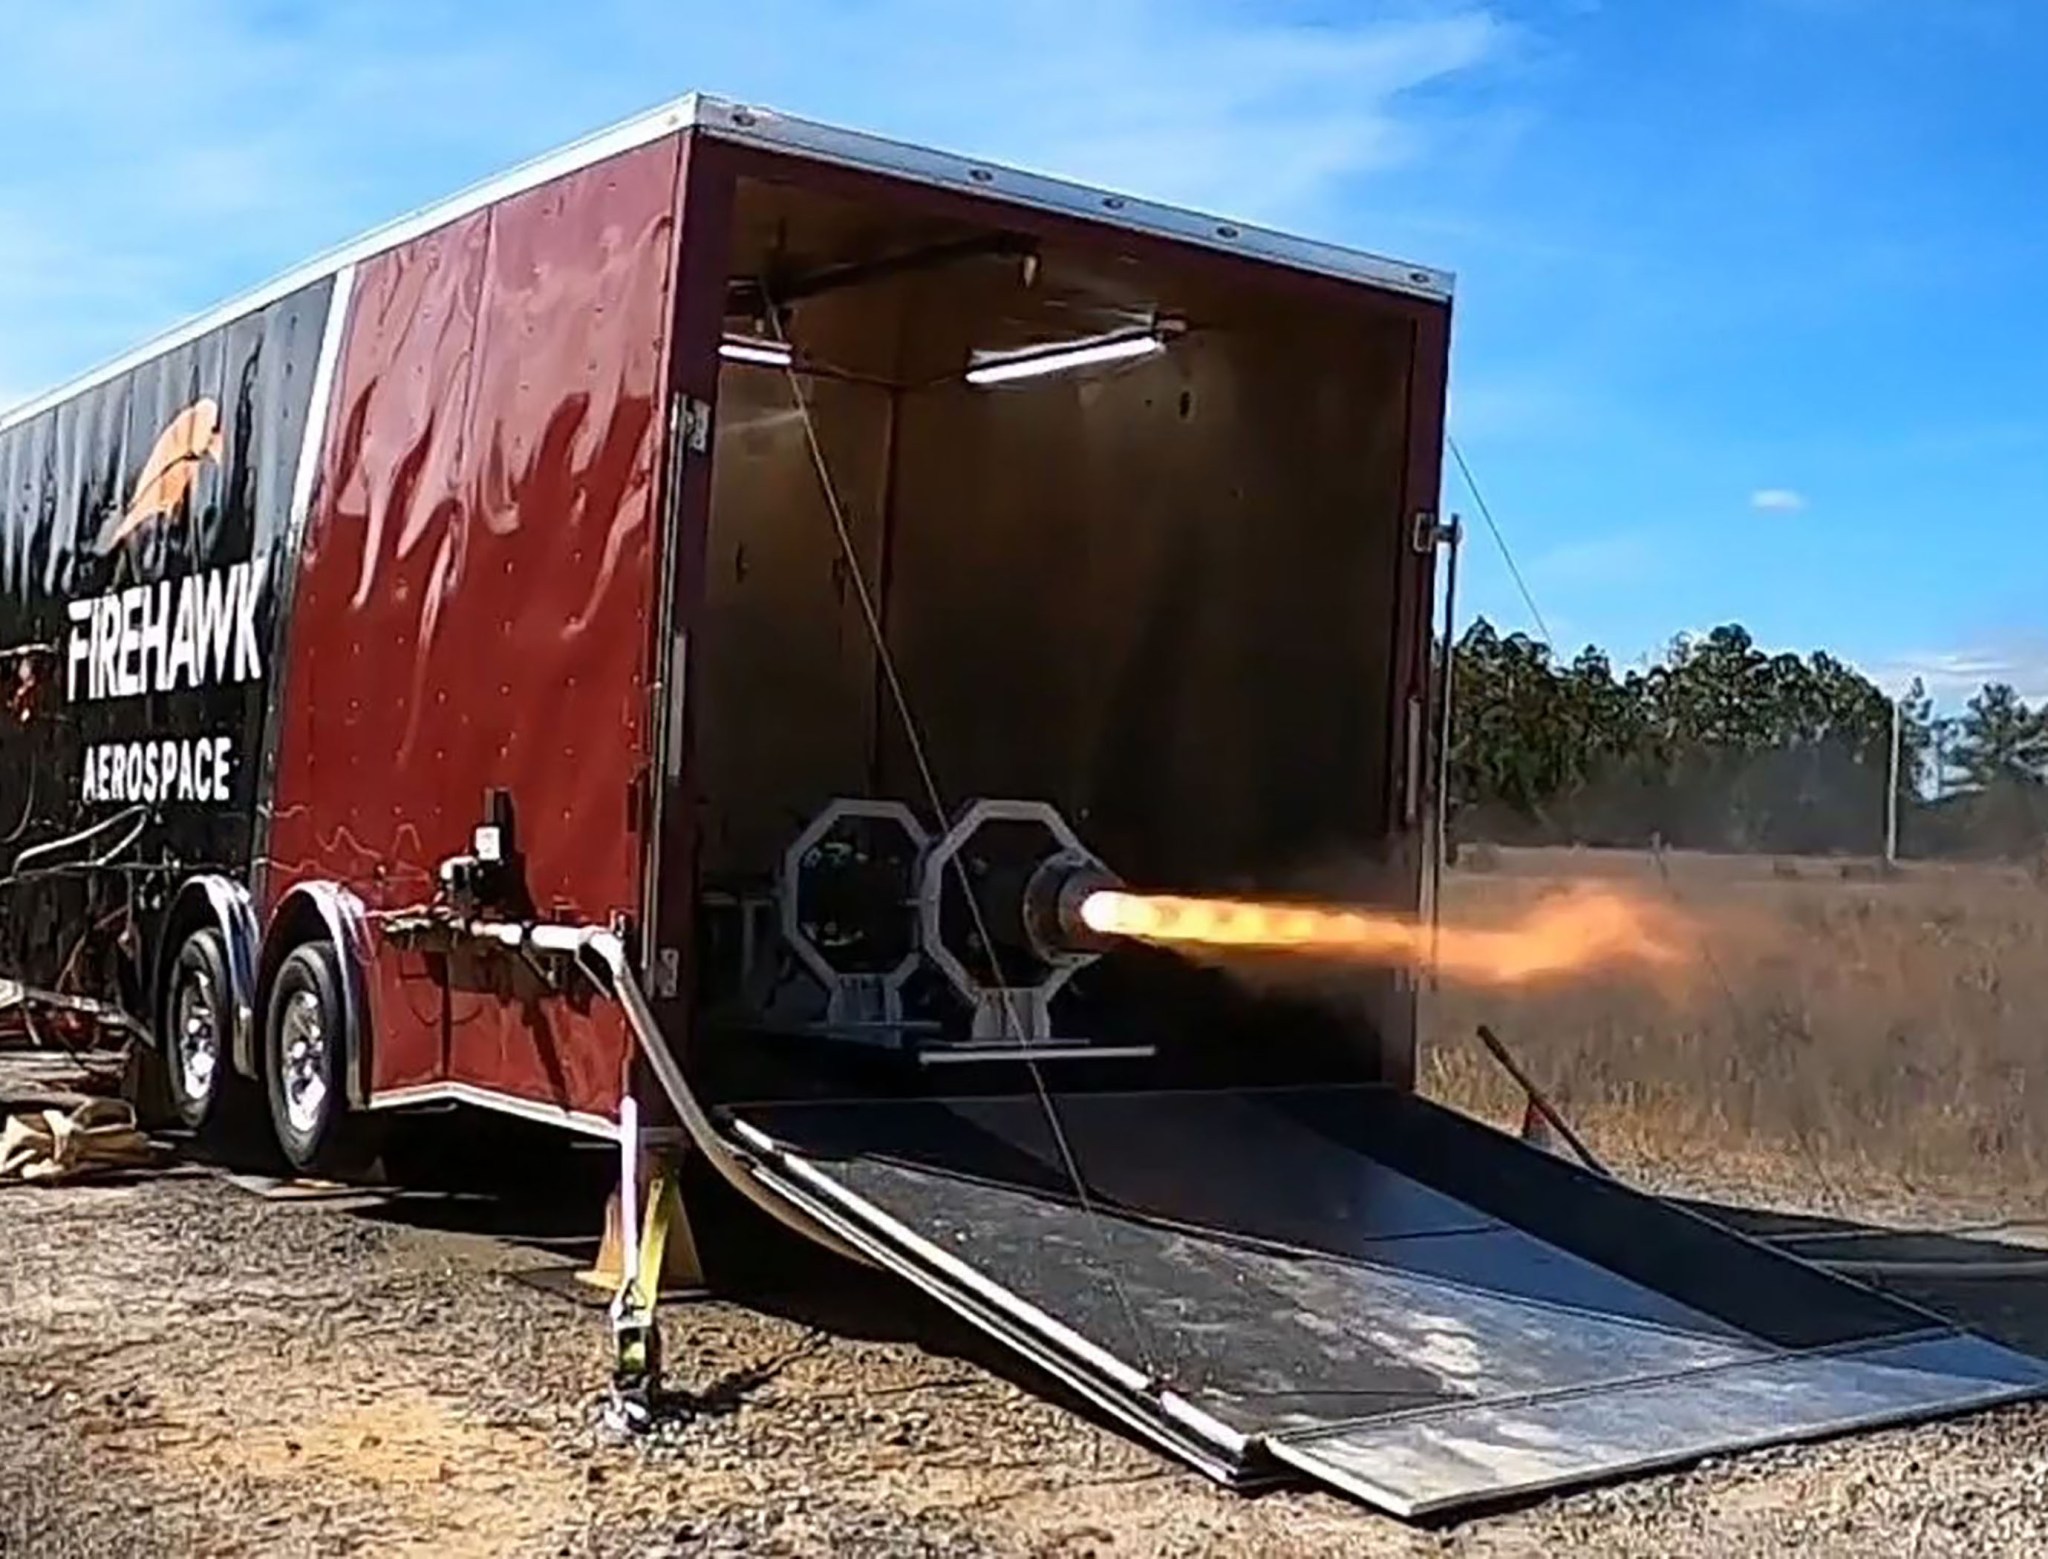 Firehawk Aerospace uses a newly built “roadable test stand” to conduct a hot fire test of its Armstrong 1k test article Dec. 1, 2021, at Stennis Space Center near Bay St. Louis, Mississippi